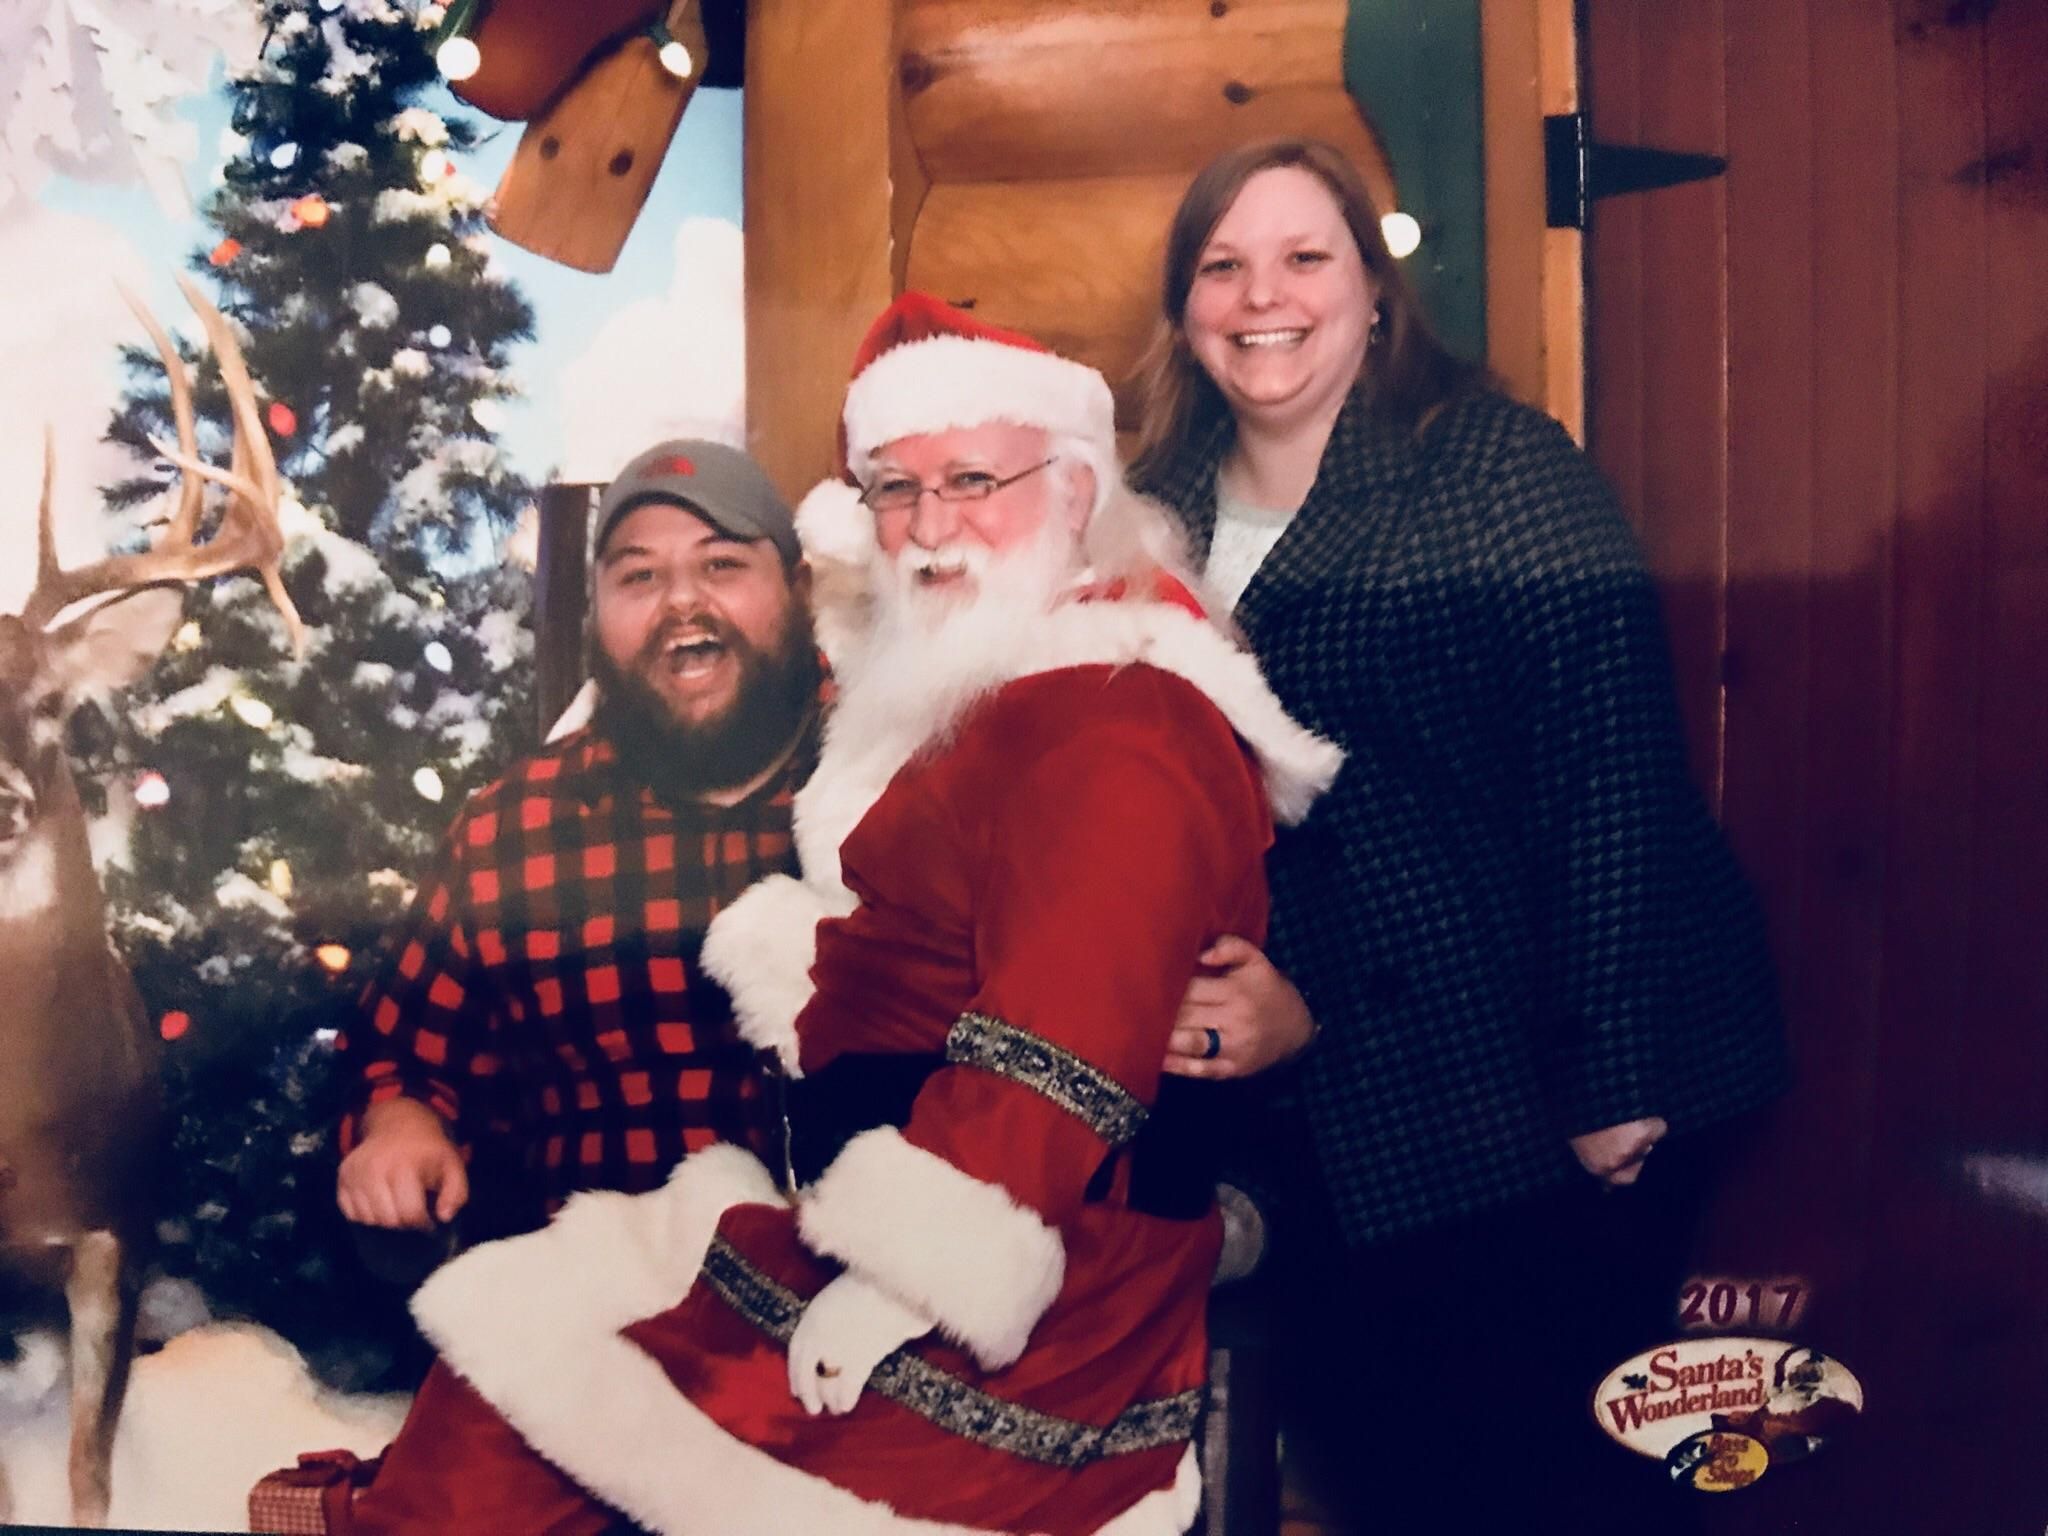 Santa complimented me on my beard and suggested I try out his chair. Then this happened.